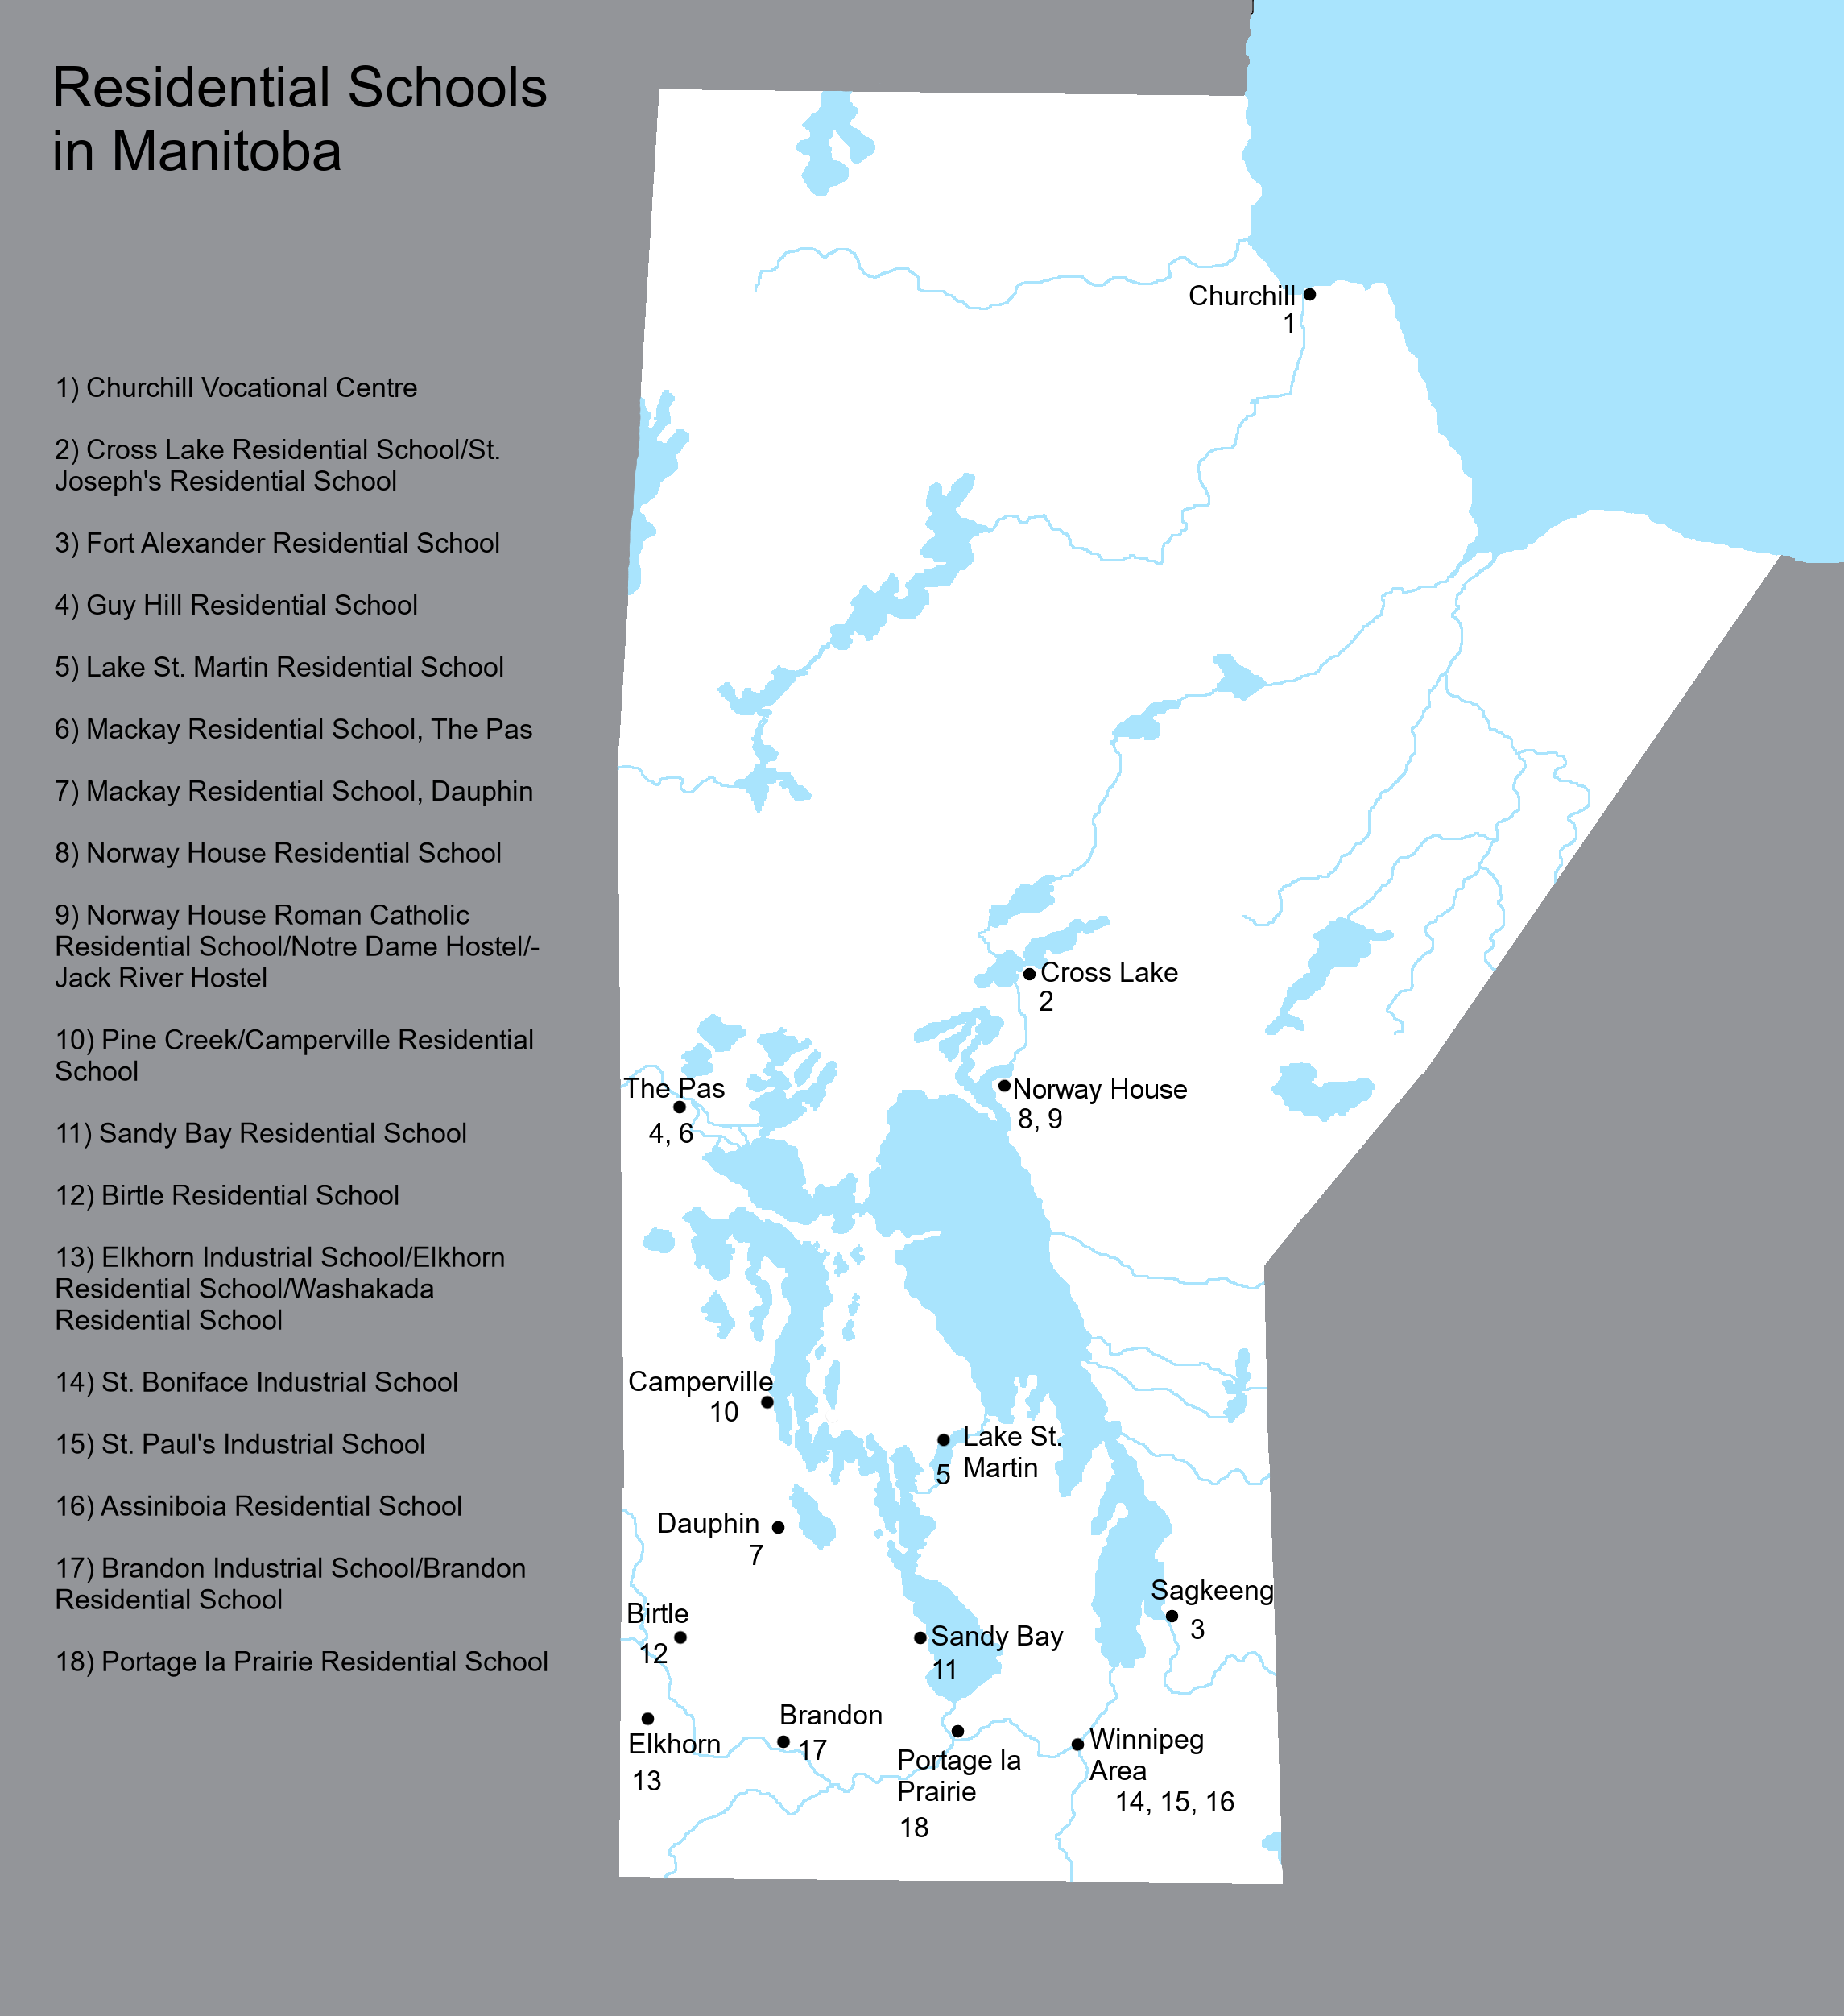 A map of Manitoba noting the locations of 18 Residential Schools around the province.